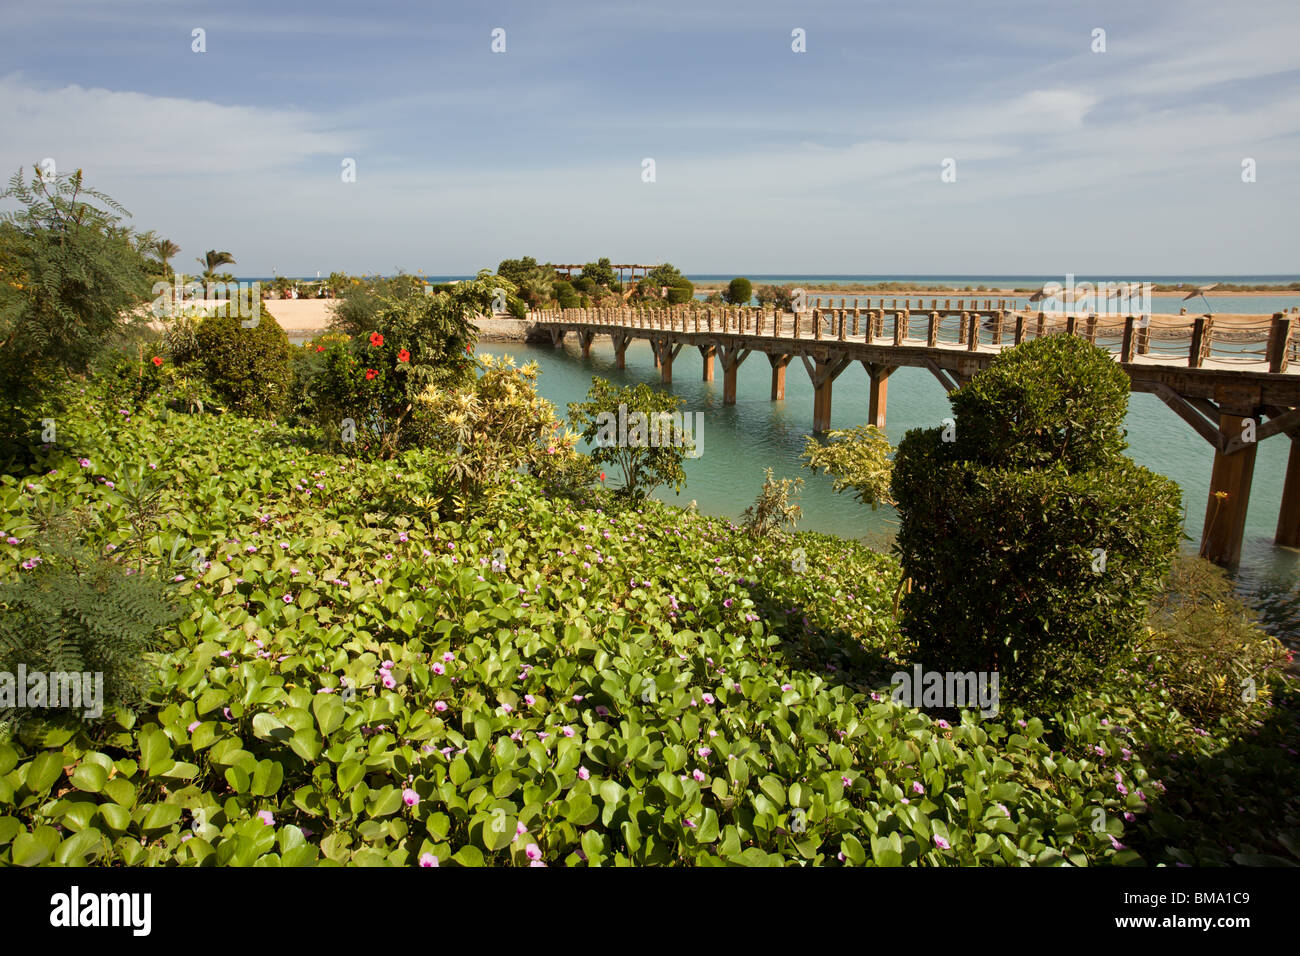 El Gouna: Canals and Greenery Stock Photo